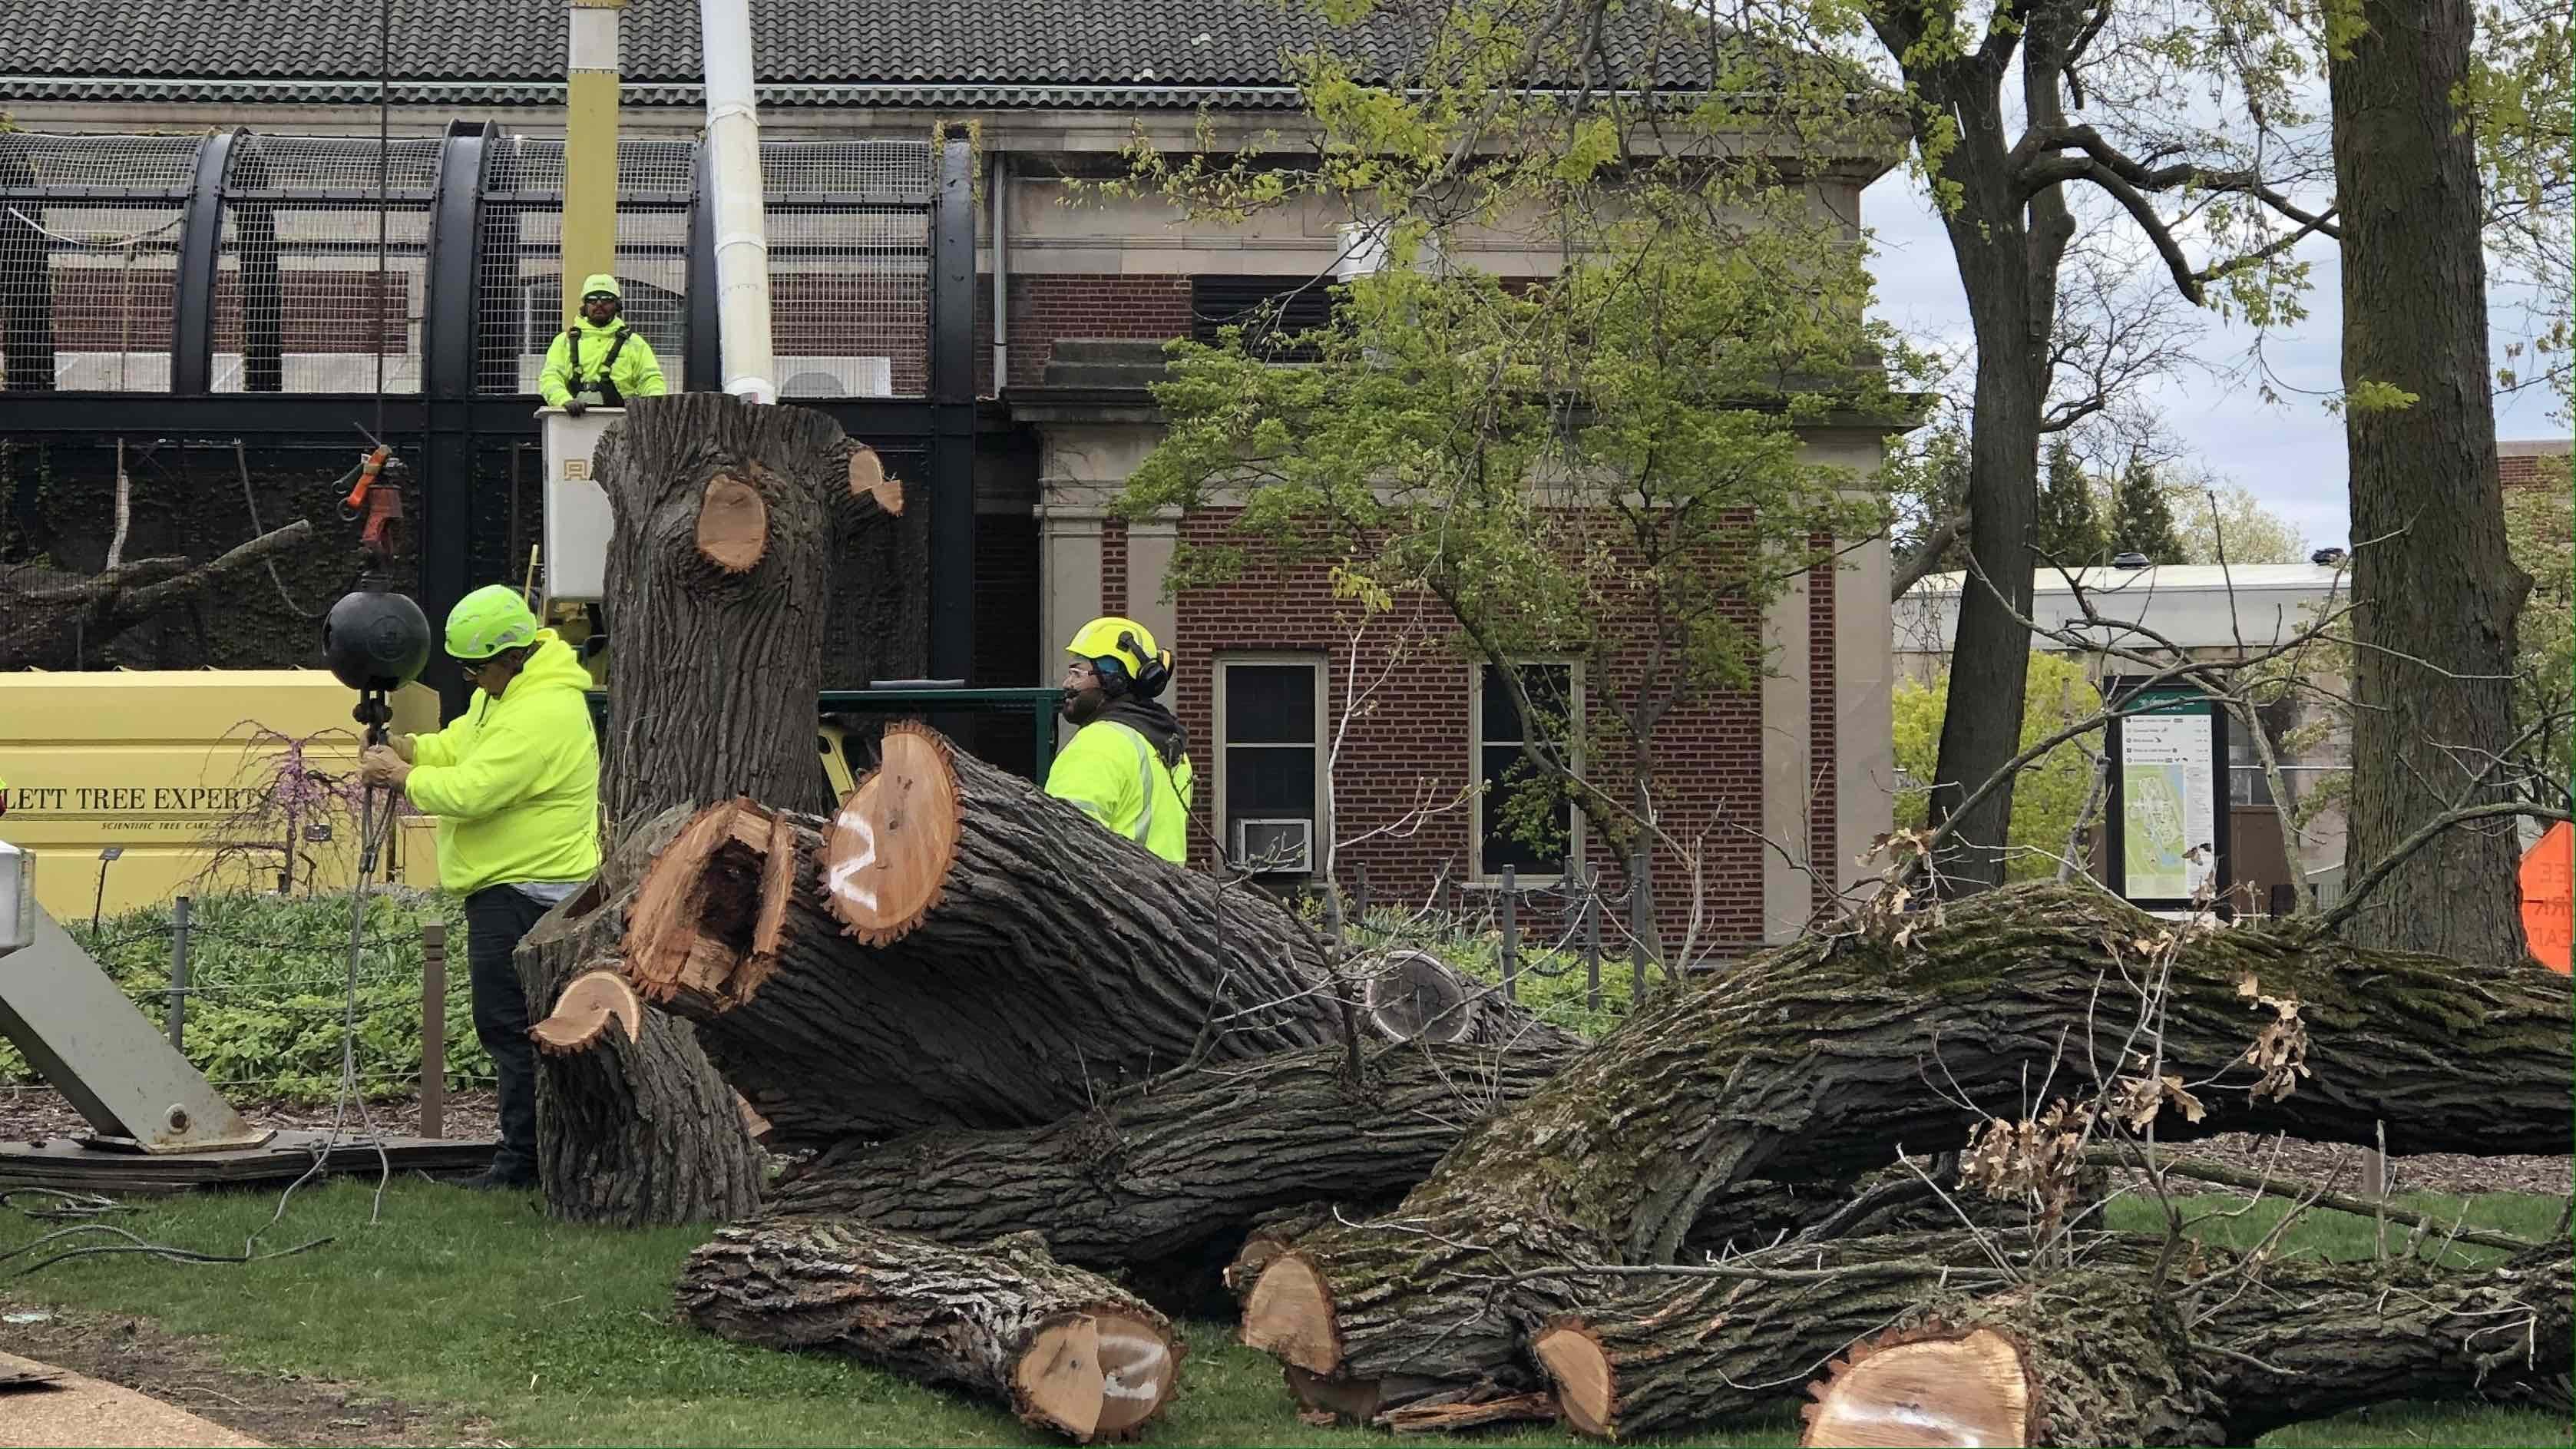 A bur oak, estimated at 250-300 years old, is dismantled at Lincoln Park Zoo, May 2, 2023. (Patty Wetli / WTTW News)